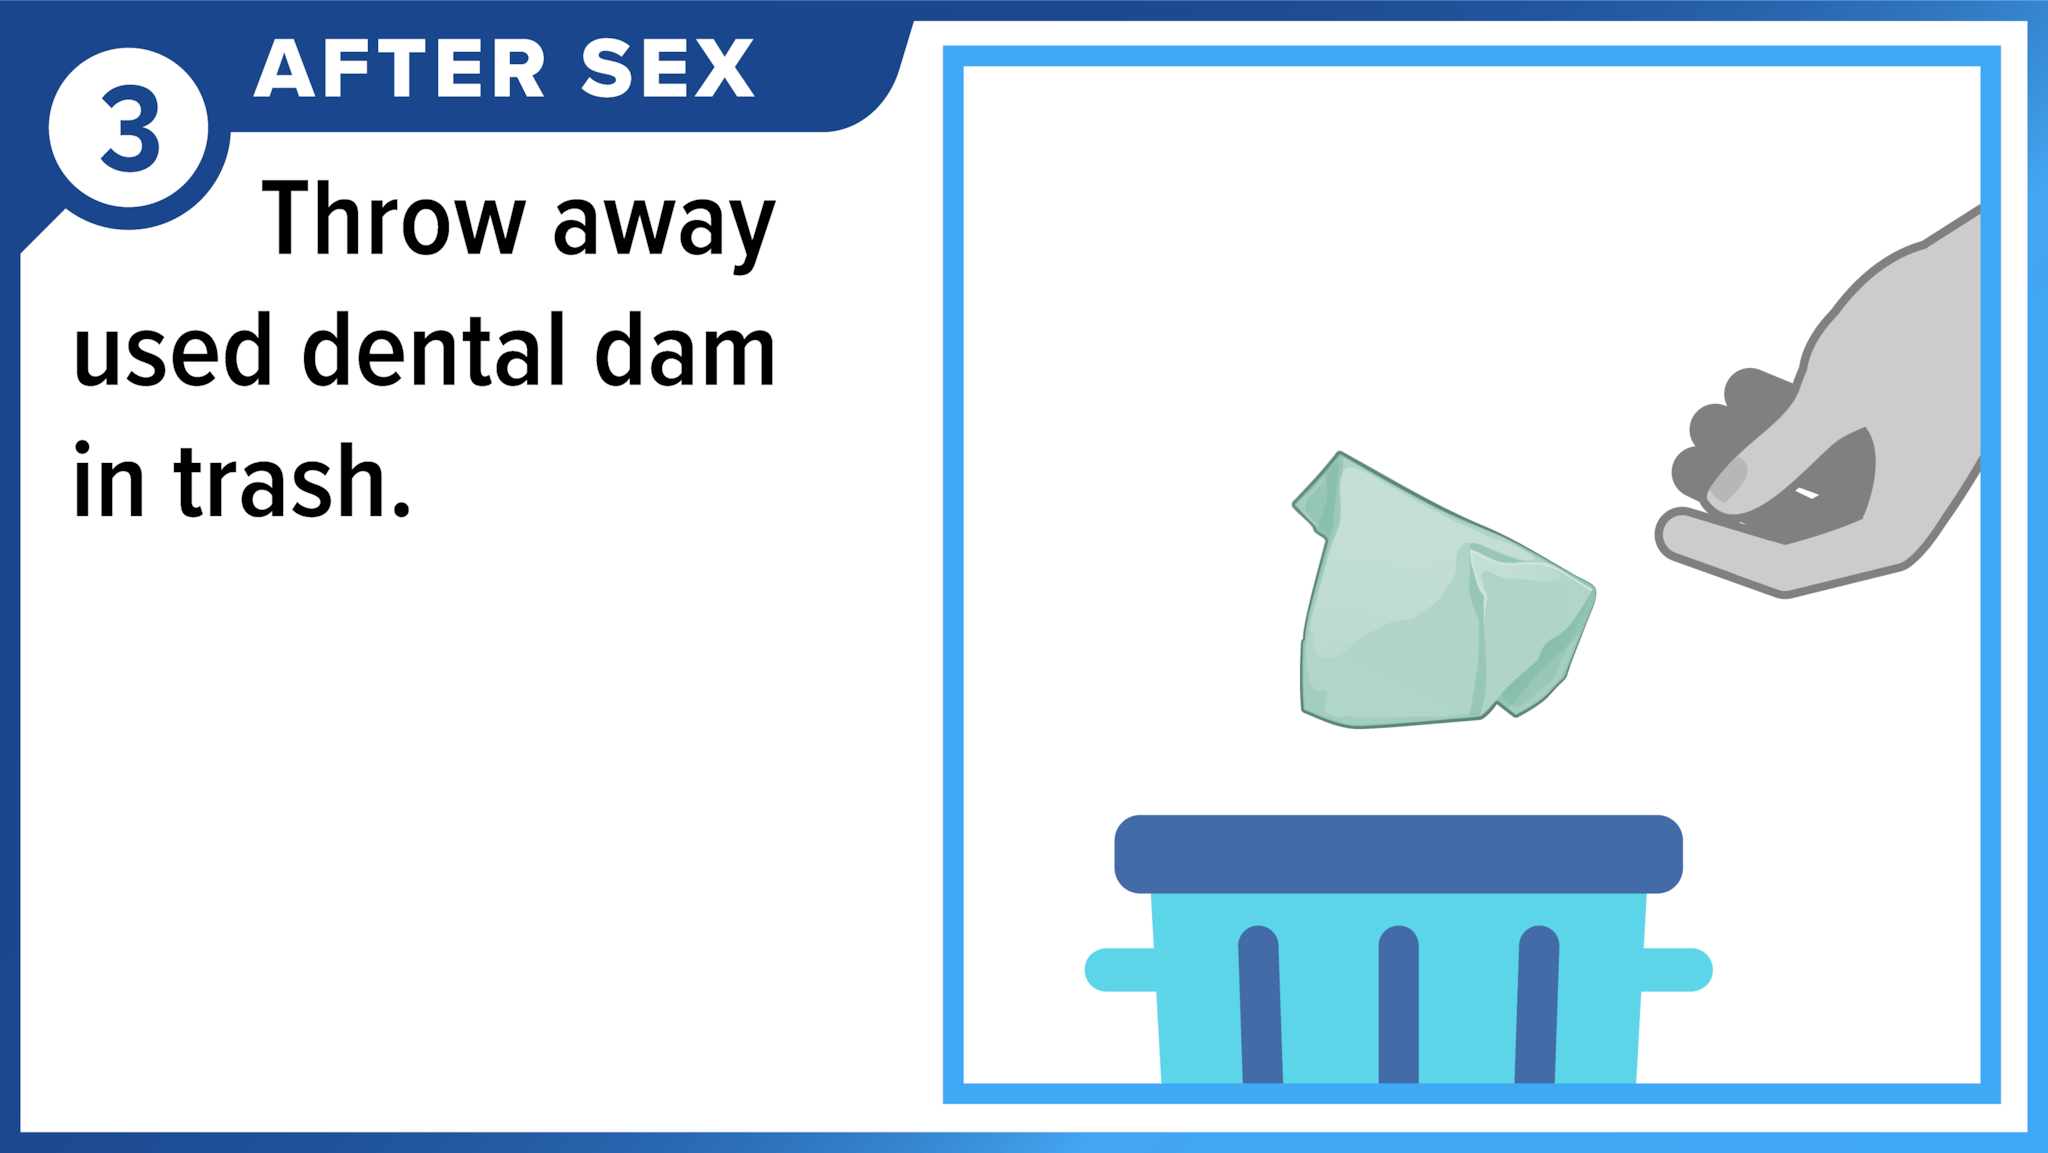 After sex - Throw away used dental dam in trash.